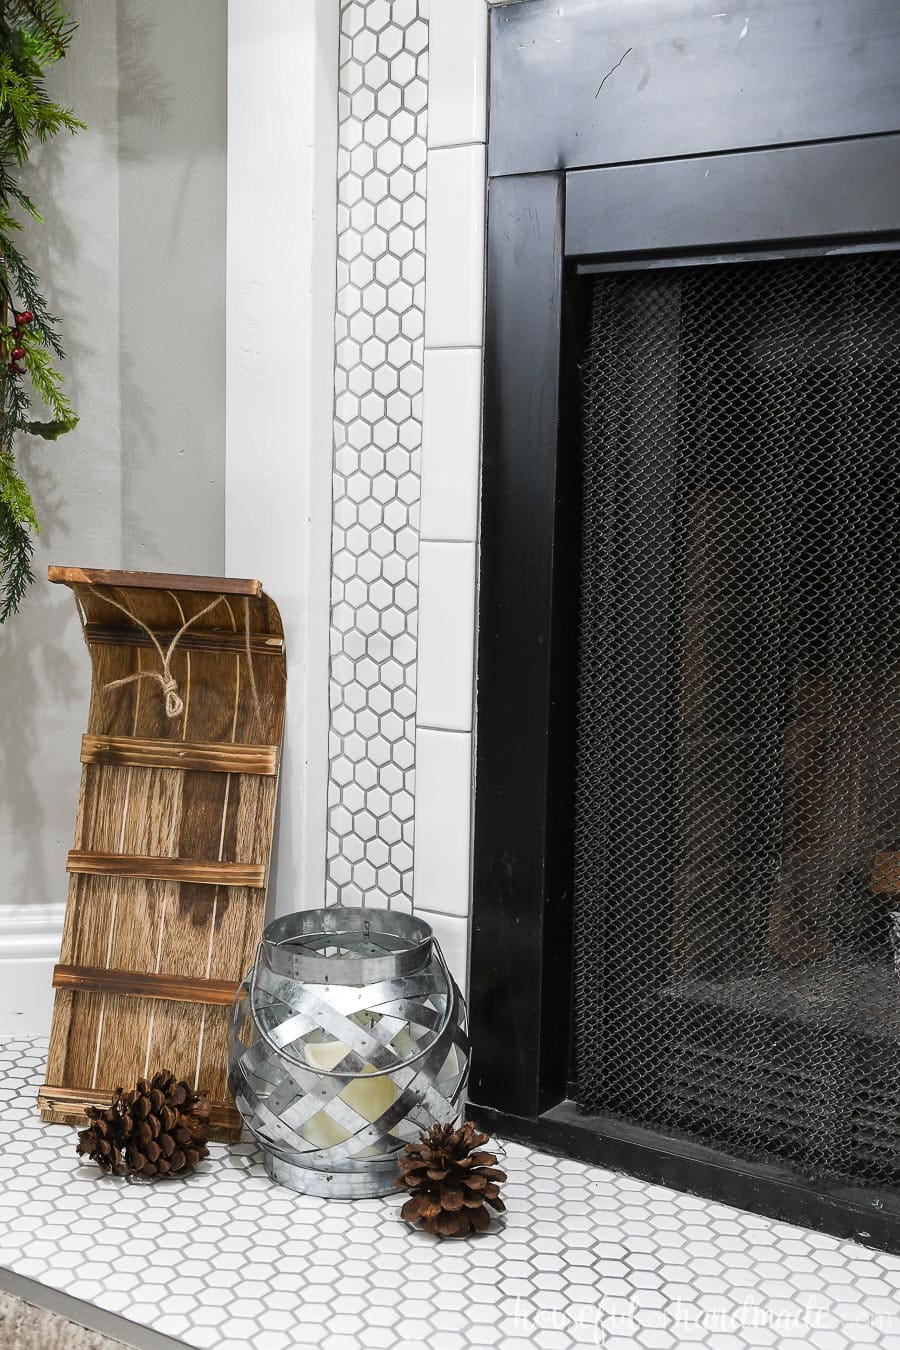 Toboggan and galvanized metal lantern on the fireplace hearth as part of the classic Christmas mantel decor. 